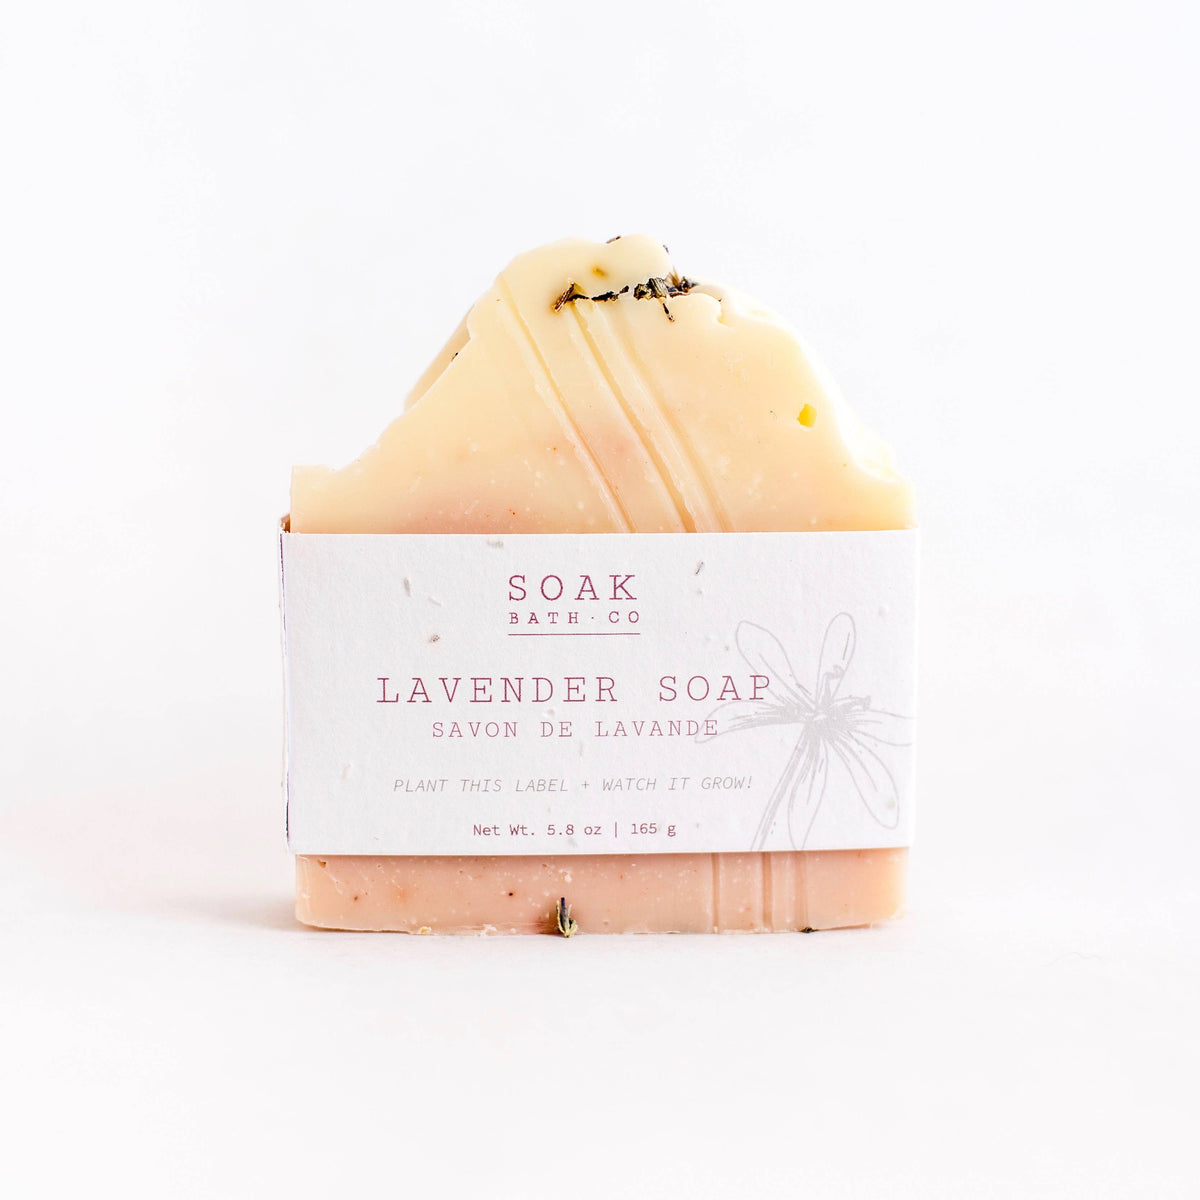 A bar of SOAK Bath Co. - Lavender Soap with a cream and pink gradient, labeled in English and French. There is a bee on the sustainable soap, set against a white background.